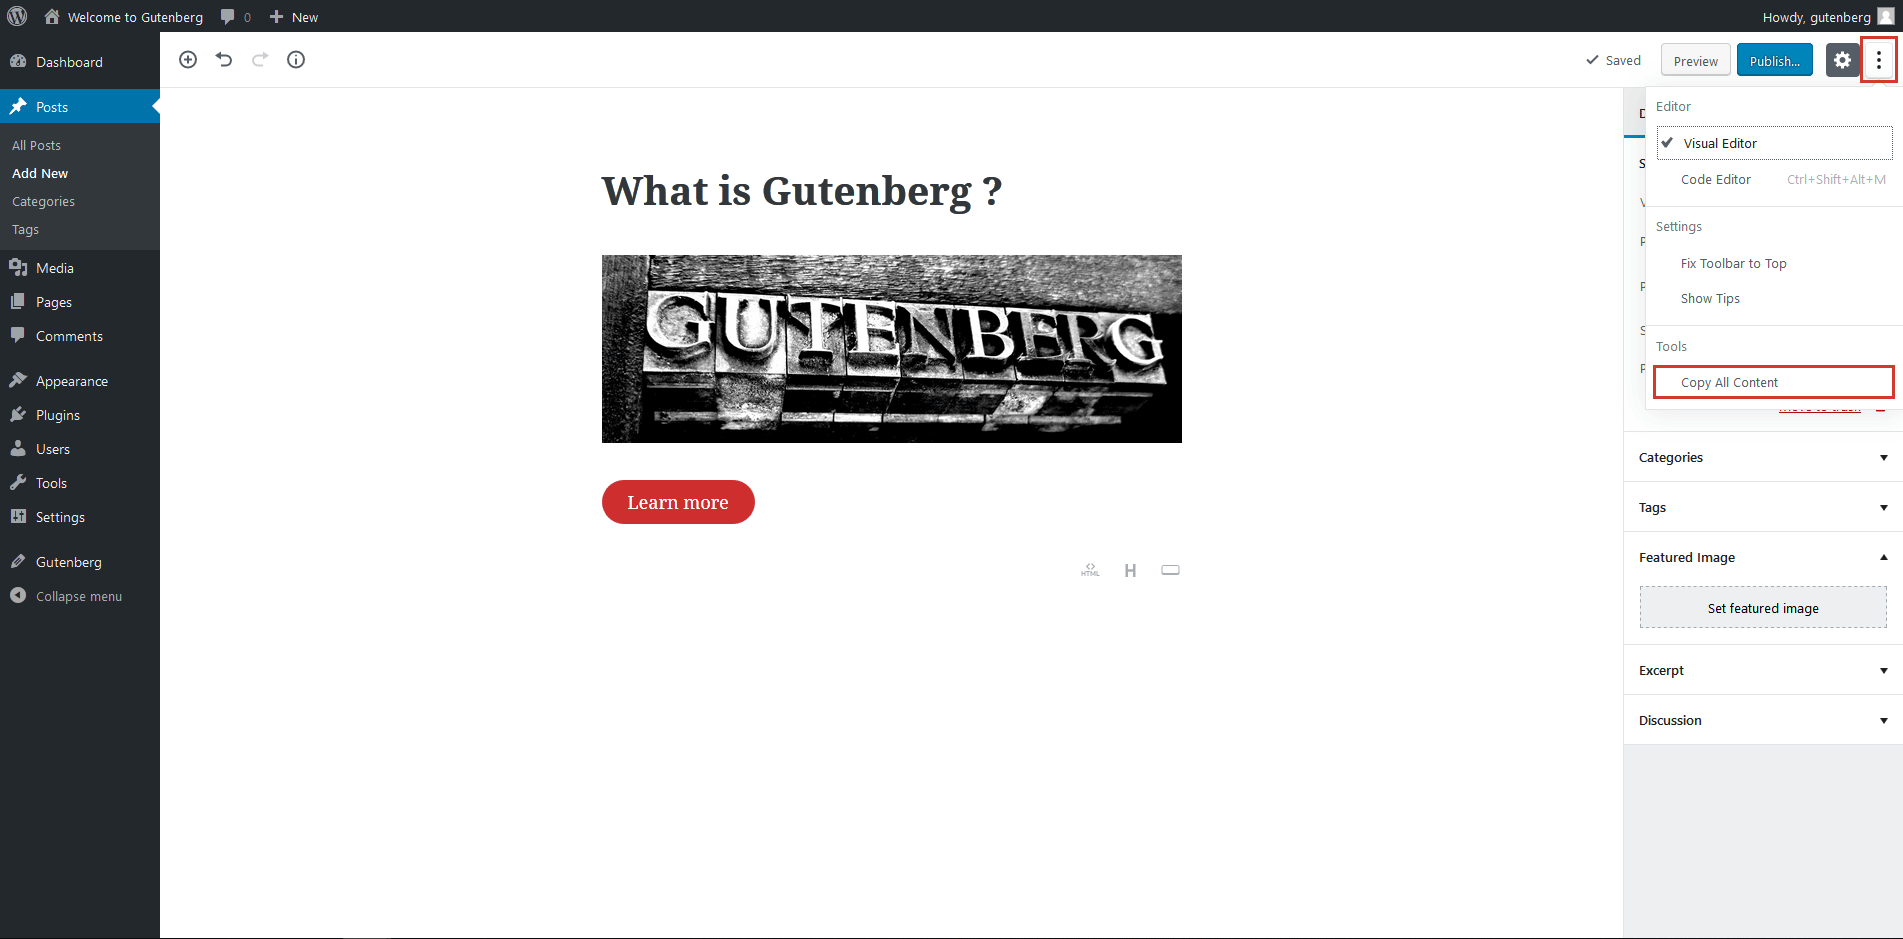 The ‘Copy All Content’ tool in Gutenberg